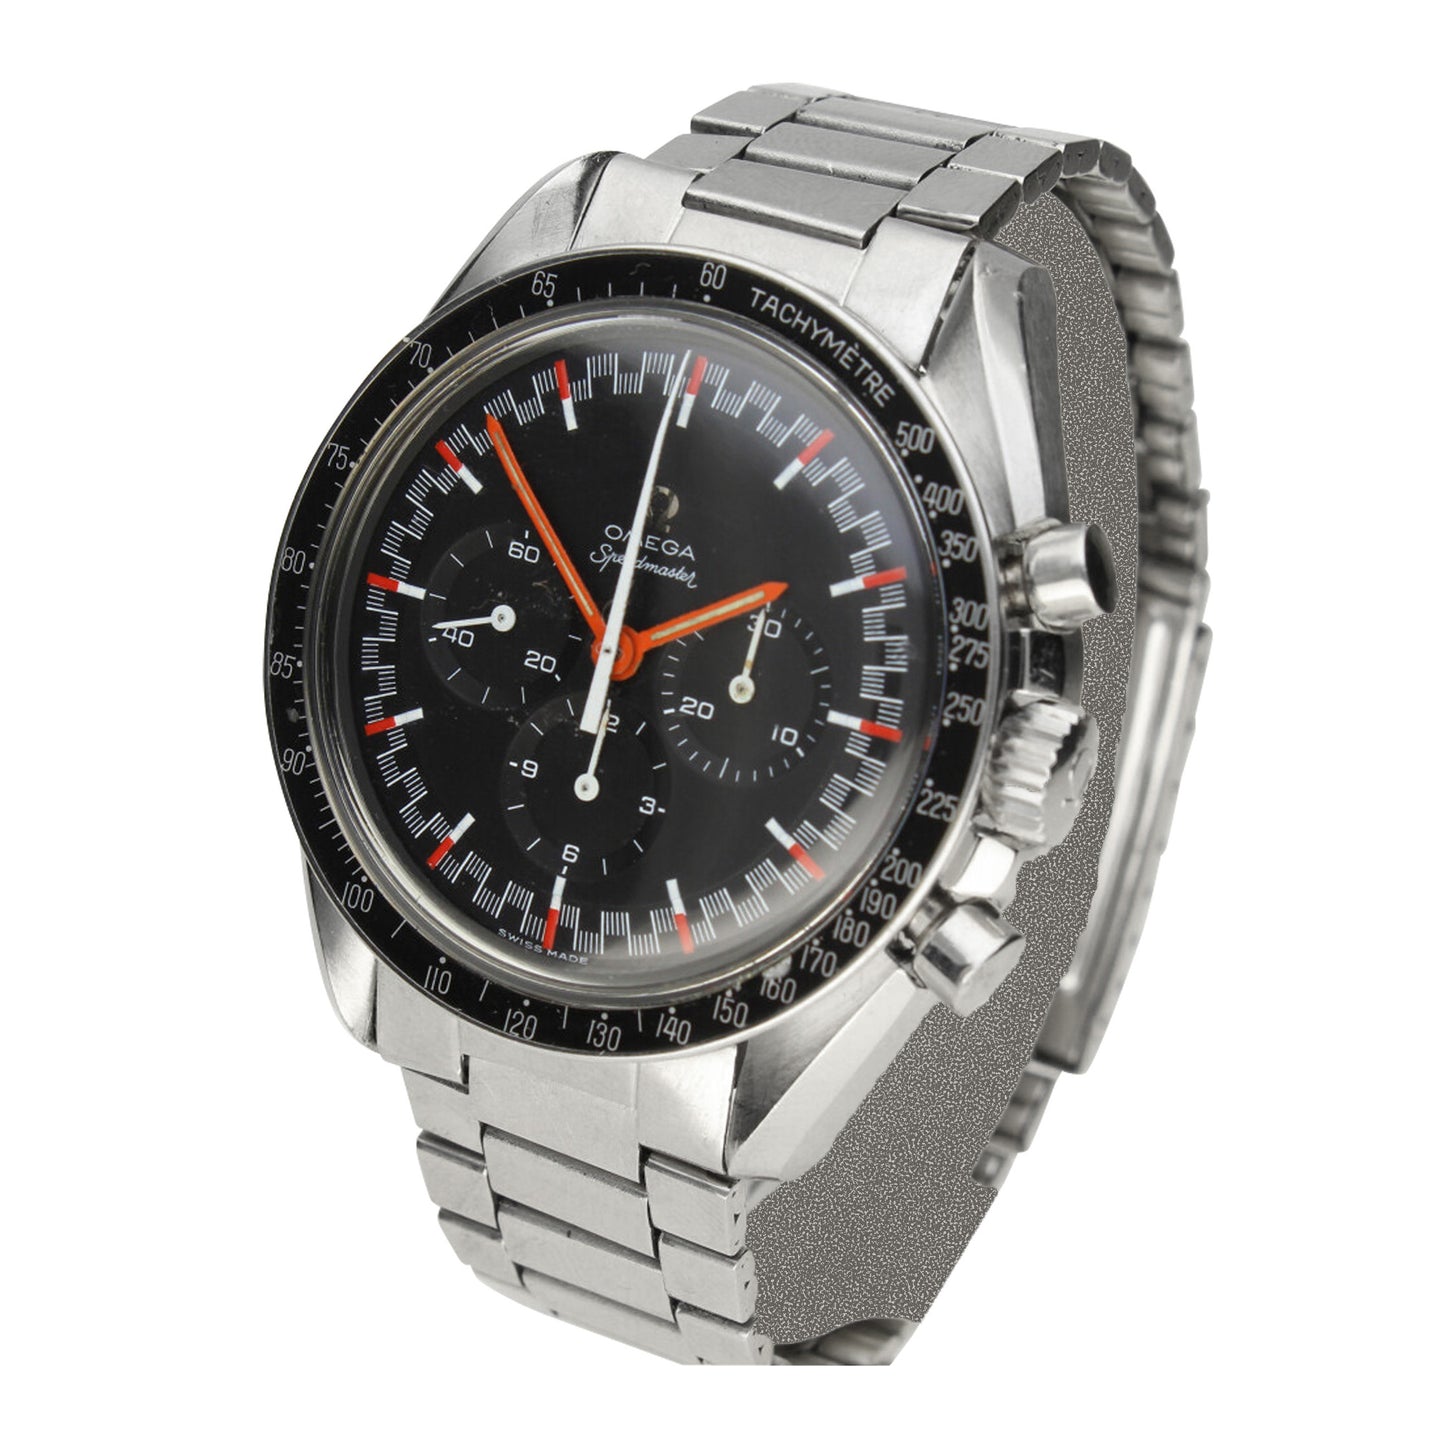 Stainless steel Speedmaster, reference 145.012 'Red Racing' chronograph wristwatch. Made 1968